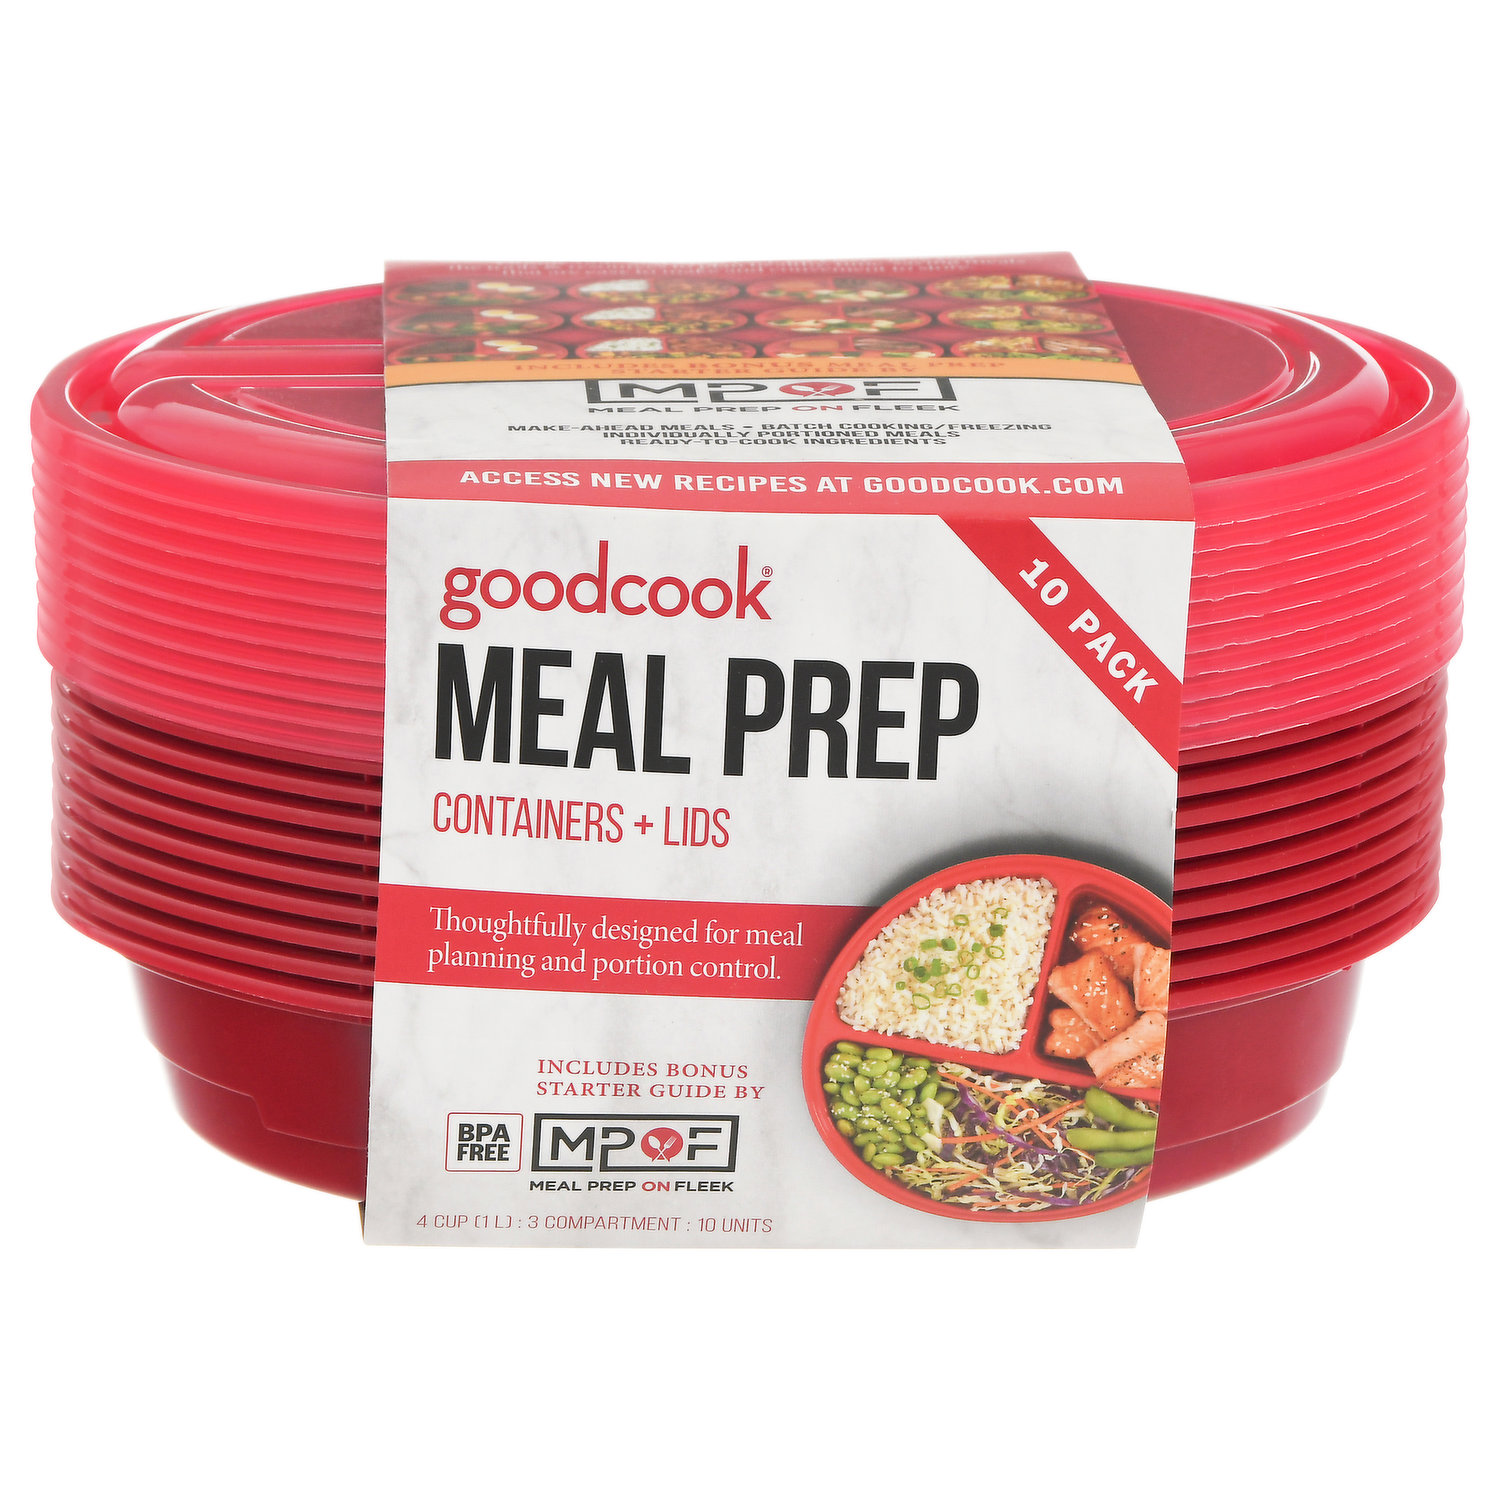 Goodcook Microwavable and Freezer Safe Meal Prep Bowl, 10 Pack